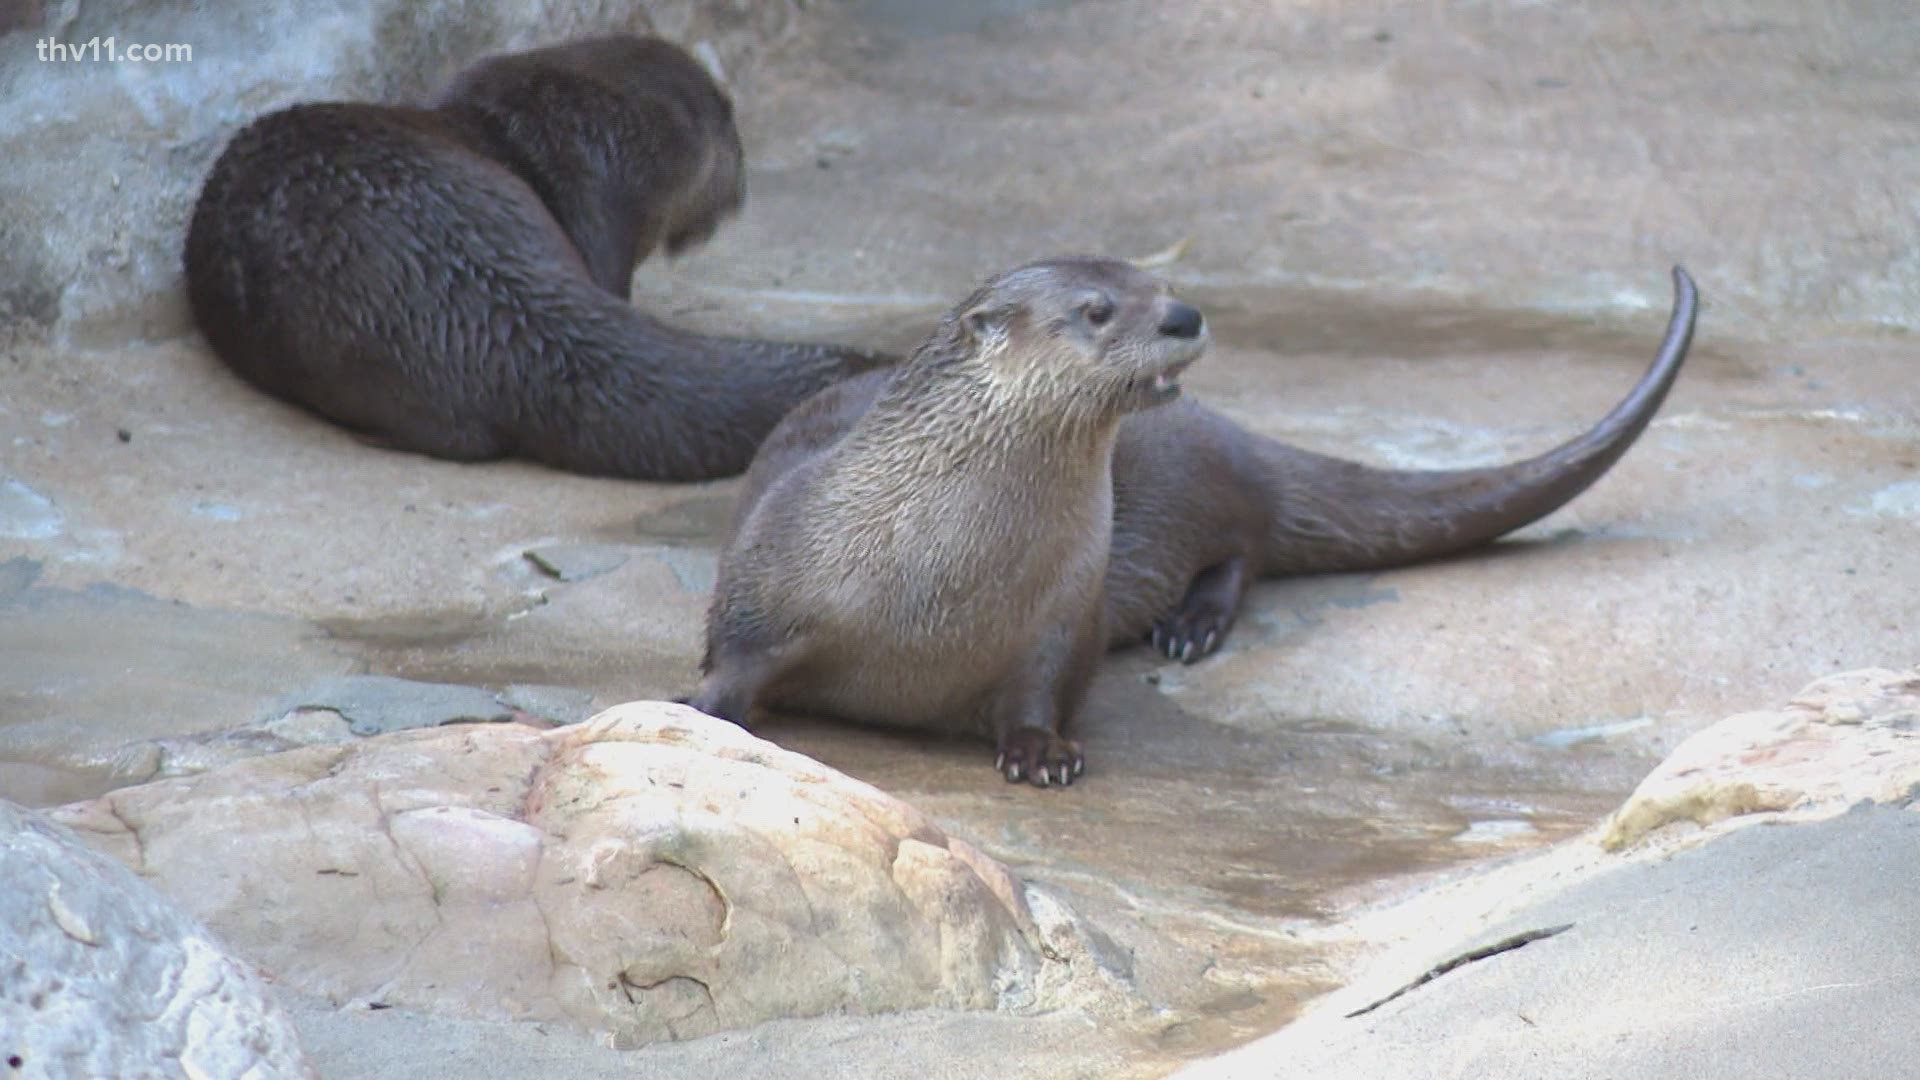 You can vote between three names for each otter, a male and female, on the Little Rock Zoo's website!